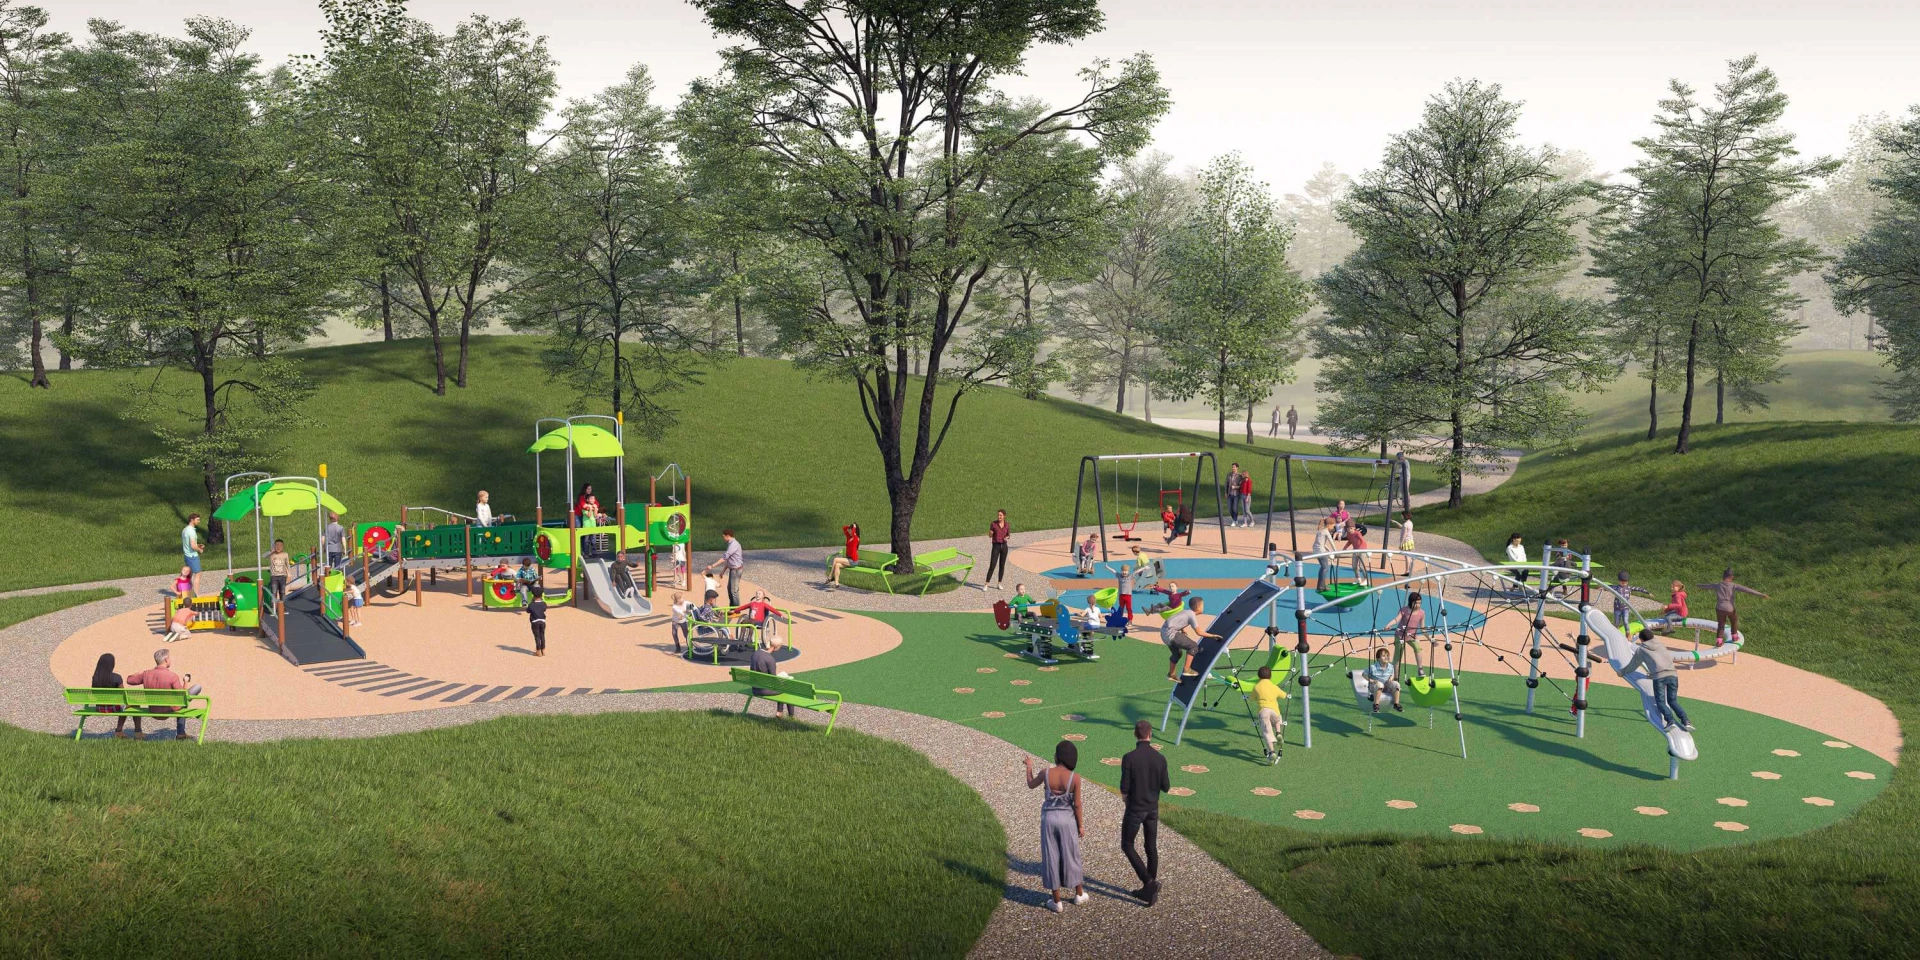 Design idea of how to build an inclusive playground in a park